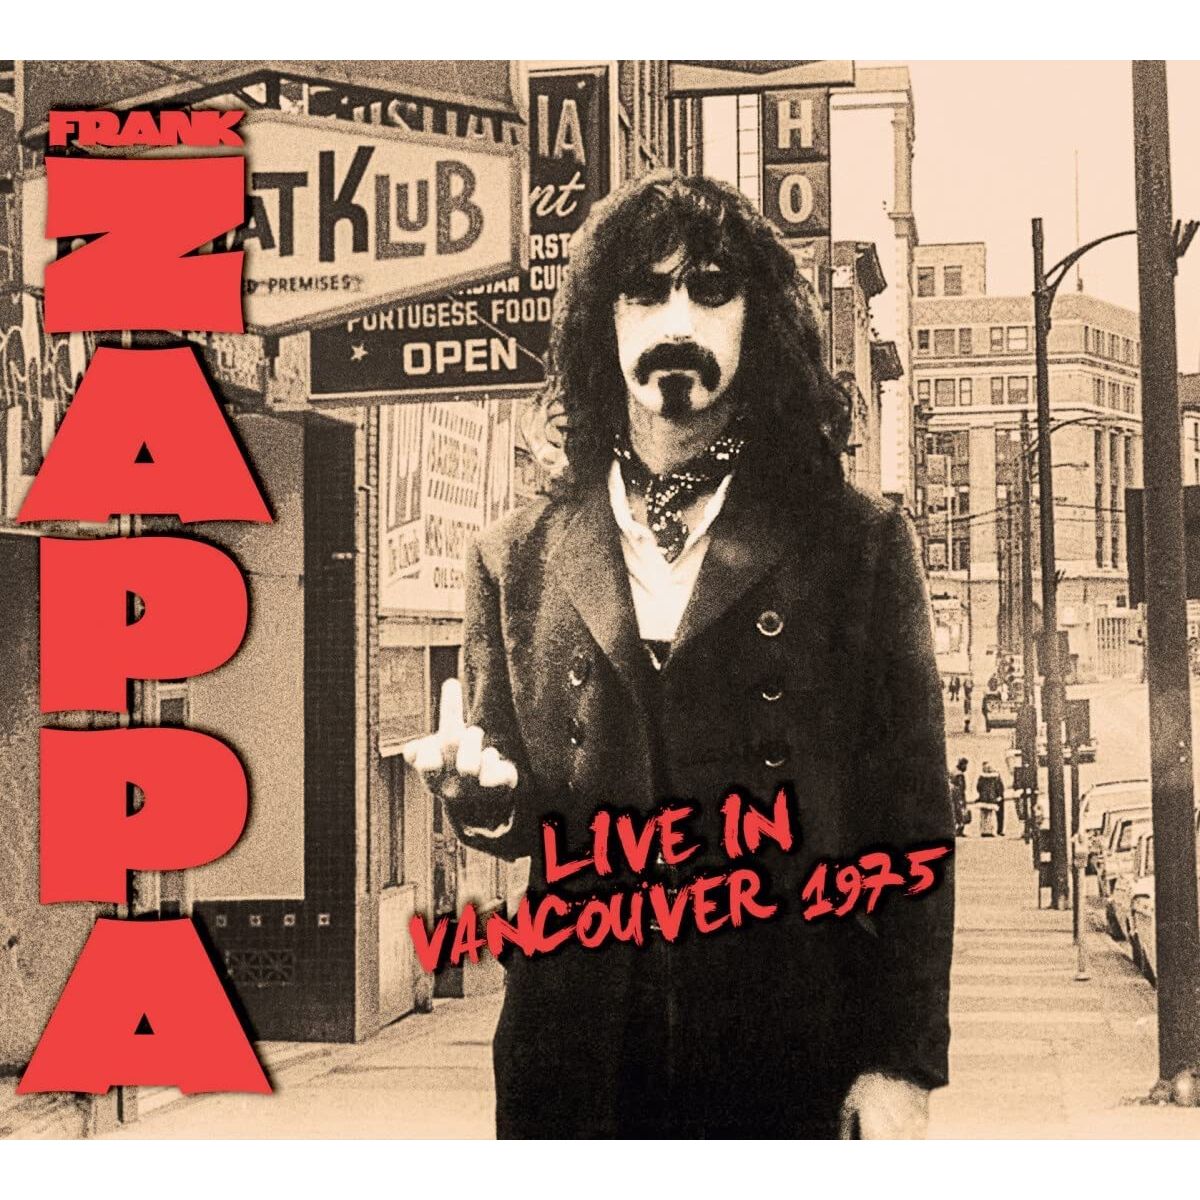 LIVE IN VANCOUVER 1975